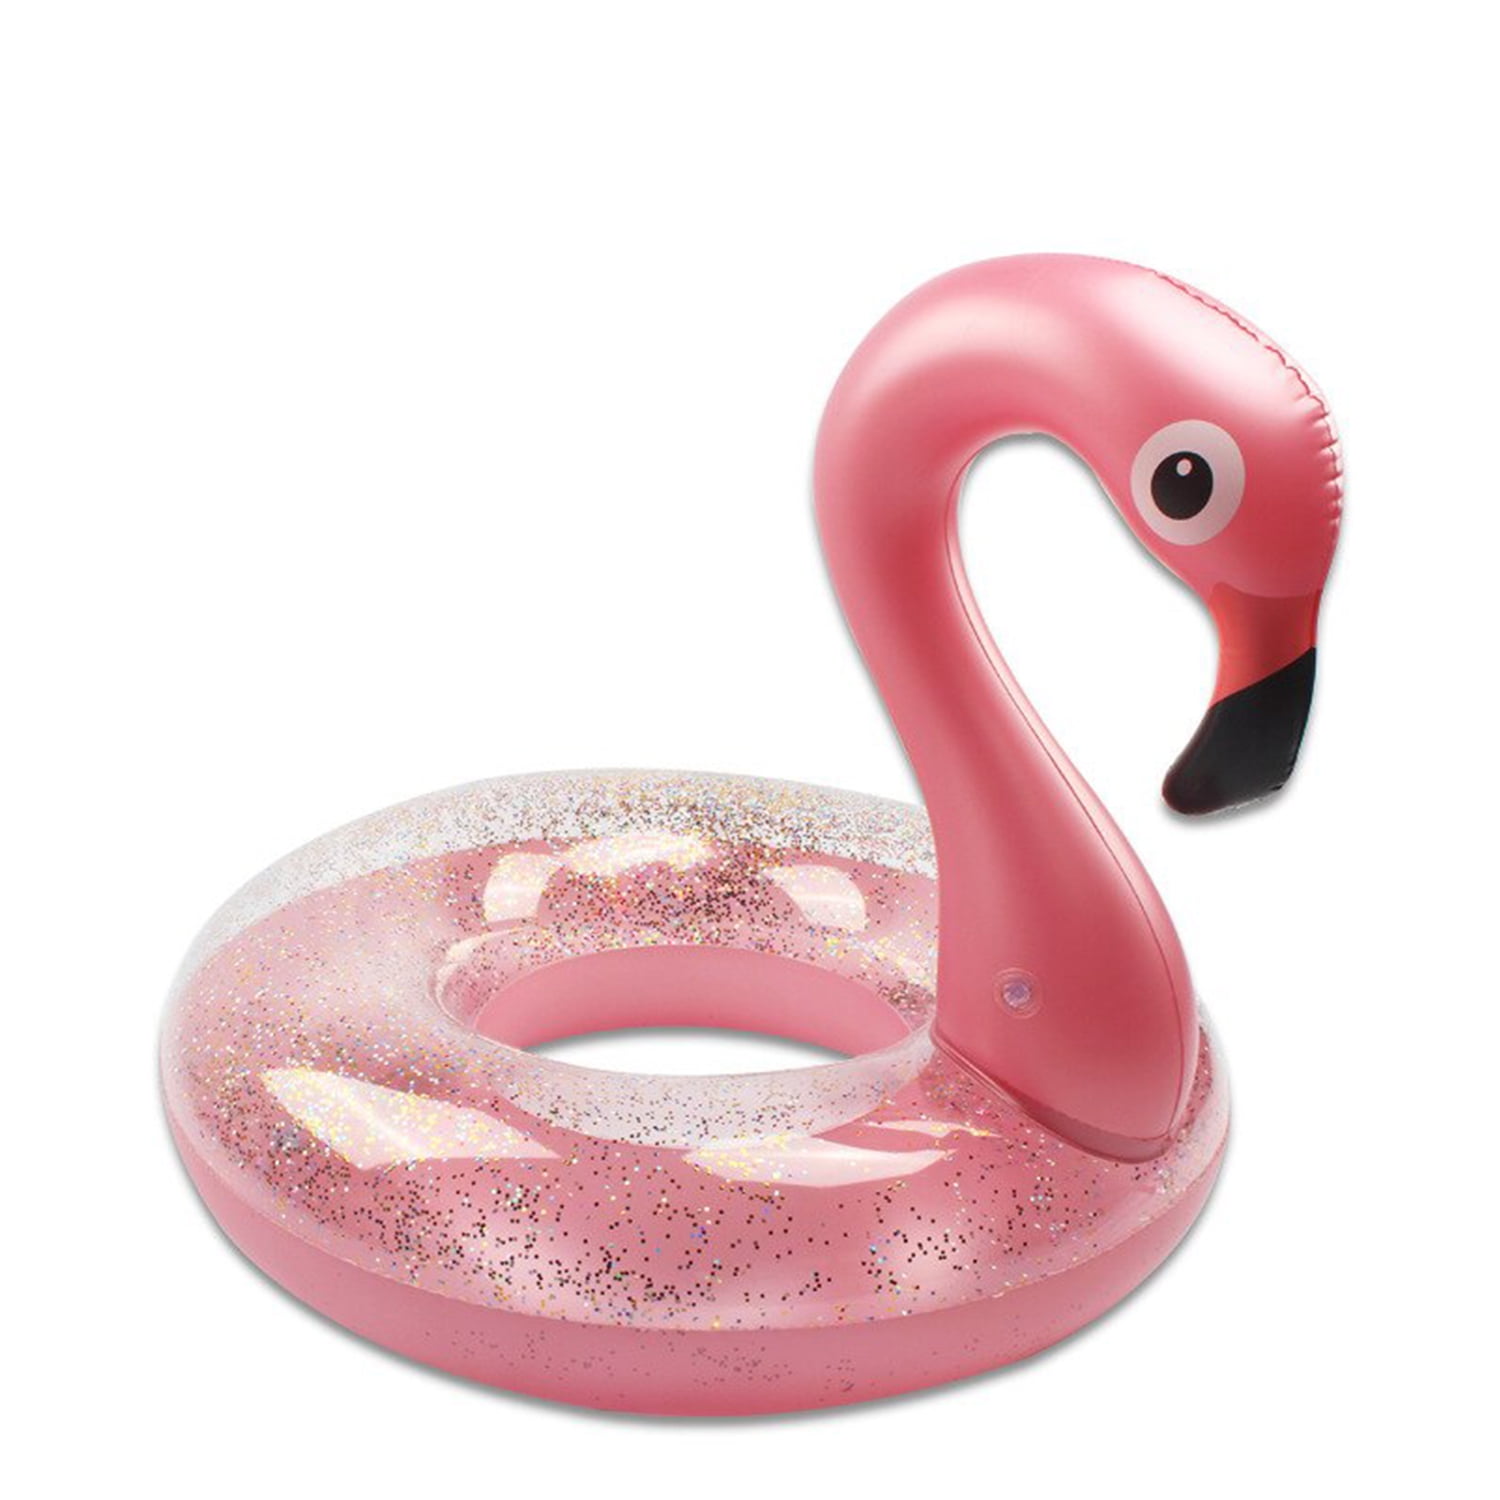 Giant Inflatable Swimming Pool Ride-on Flamingo Float Pink Summer Toy HUGE Kids